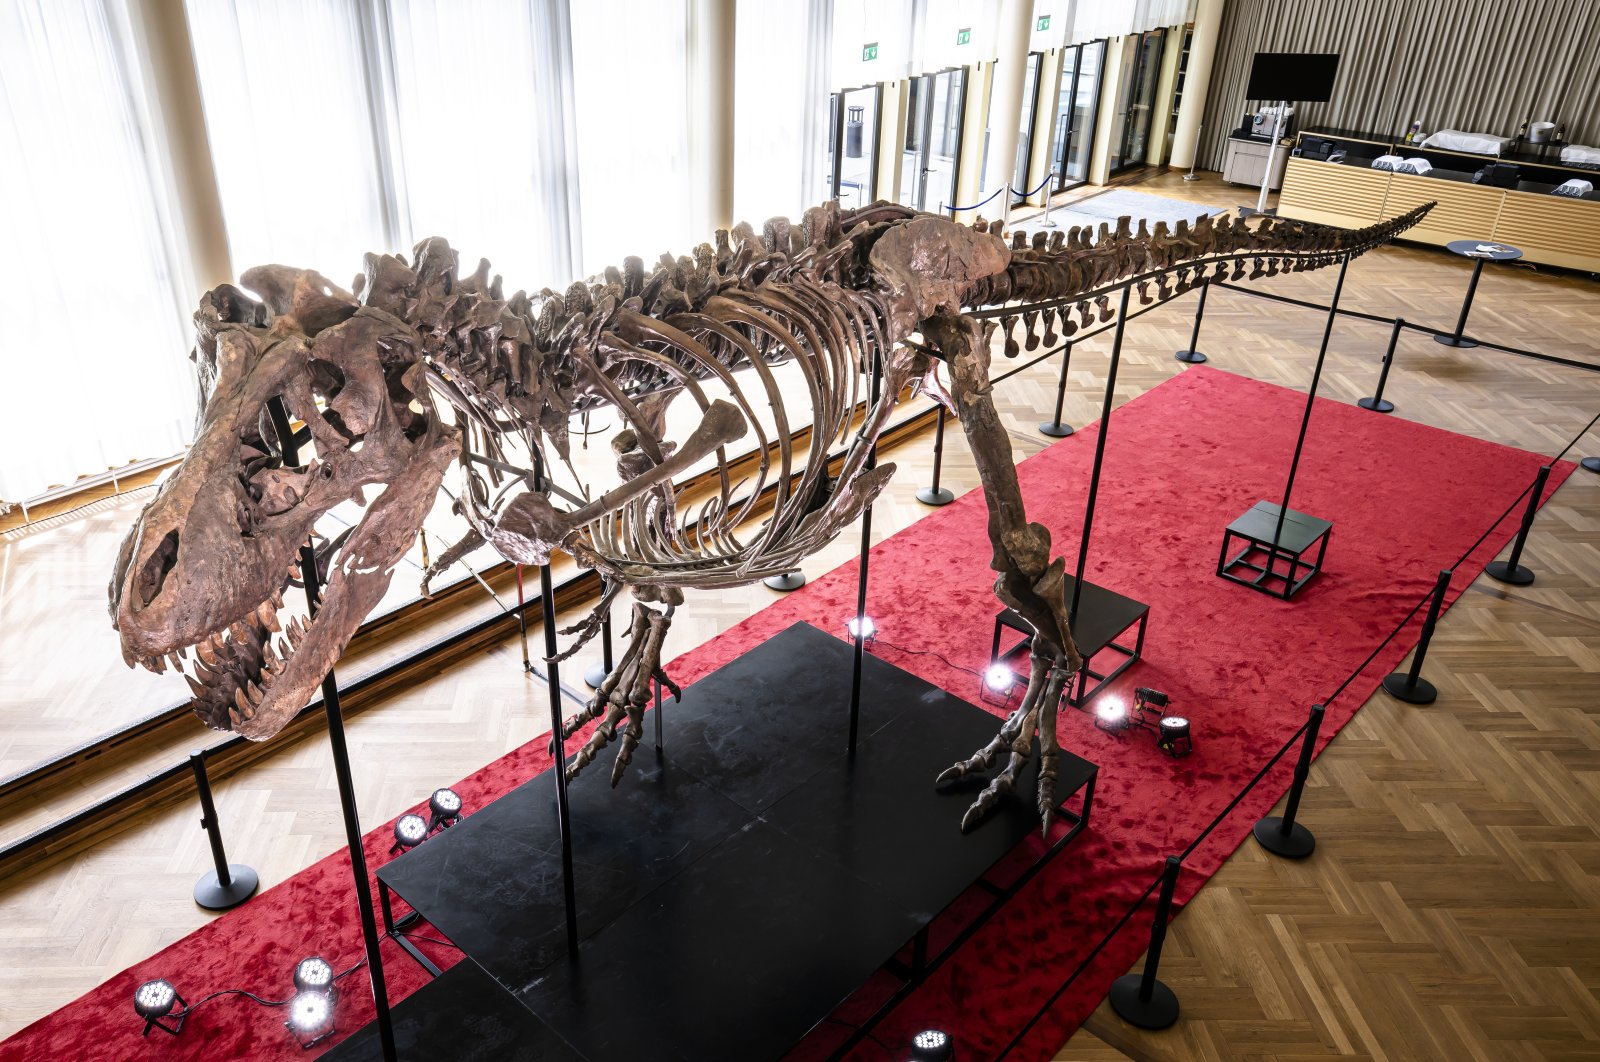 The skeleton of a Tyrannosaurus rex named Trinity, is displayed at the Tonhalle Zurich concert hall, in Zurich, Switzerland, March 29, 2023. (EPA Photo)